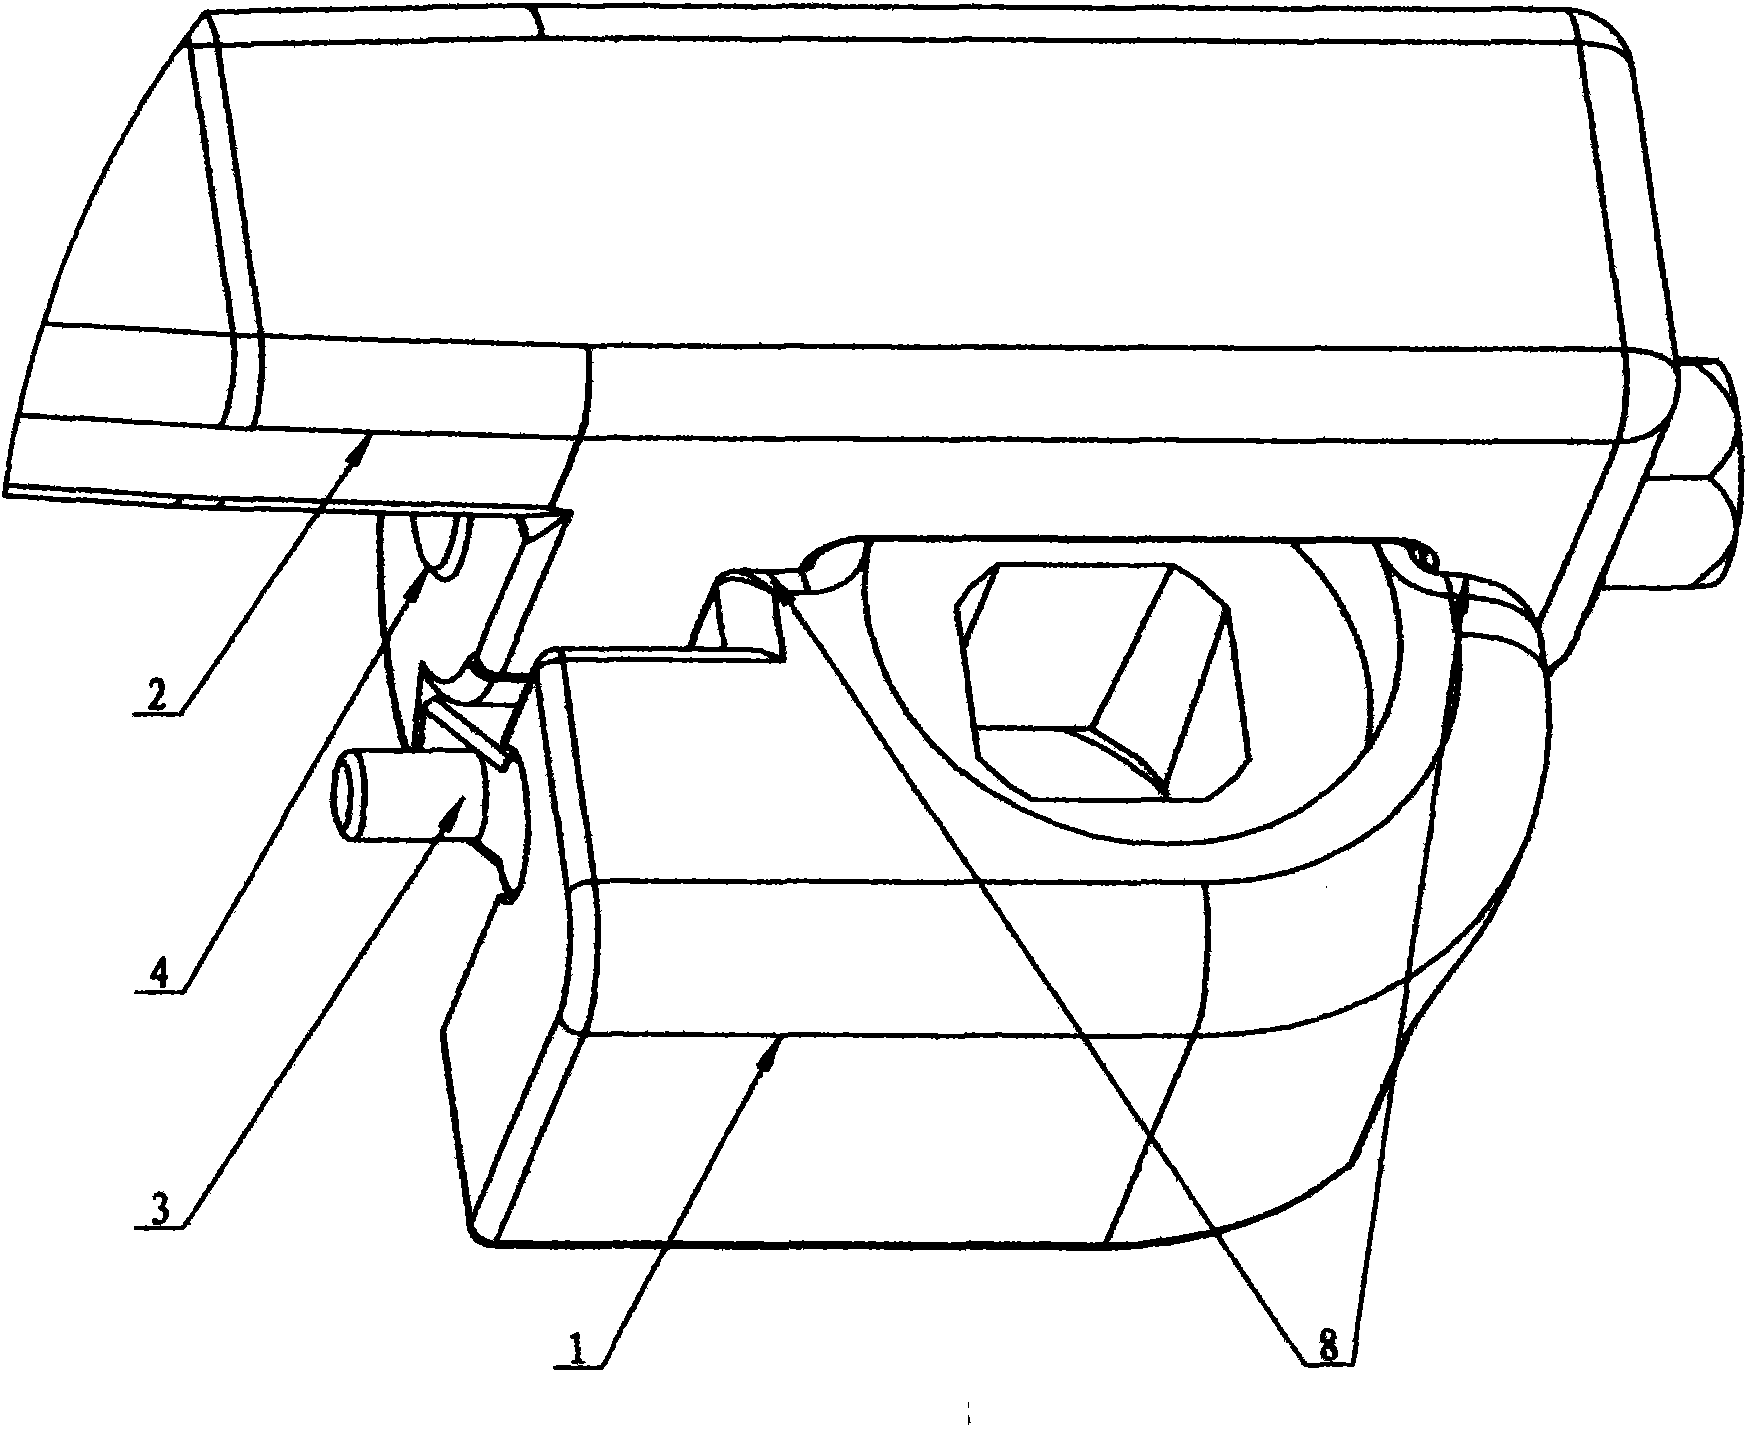 Folded pedal for folded bicycle